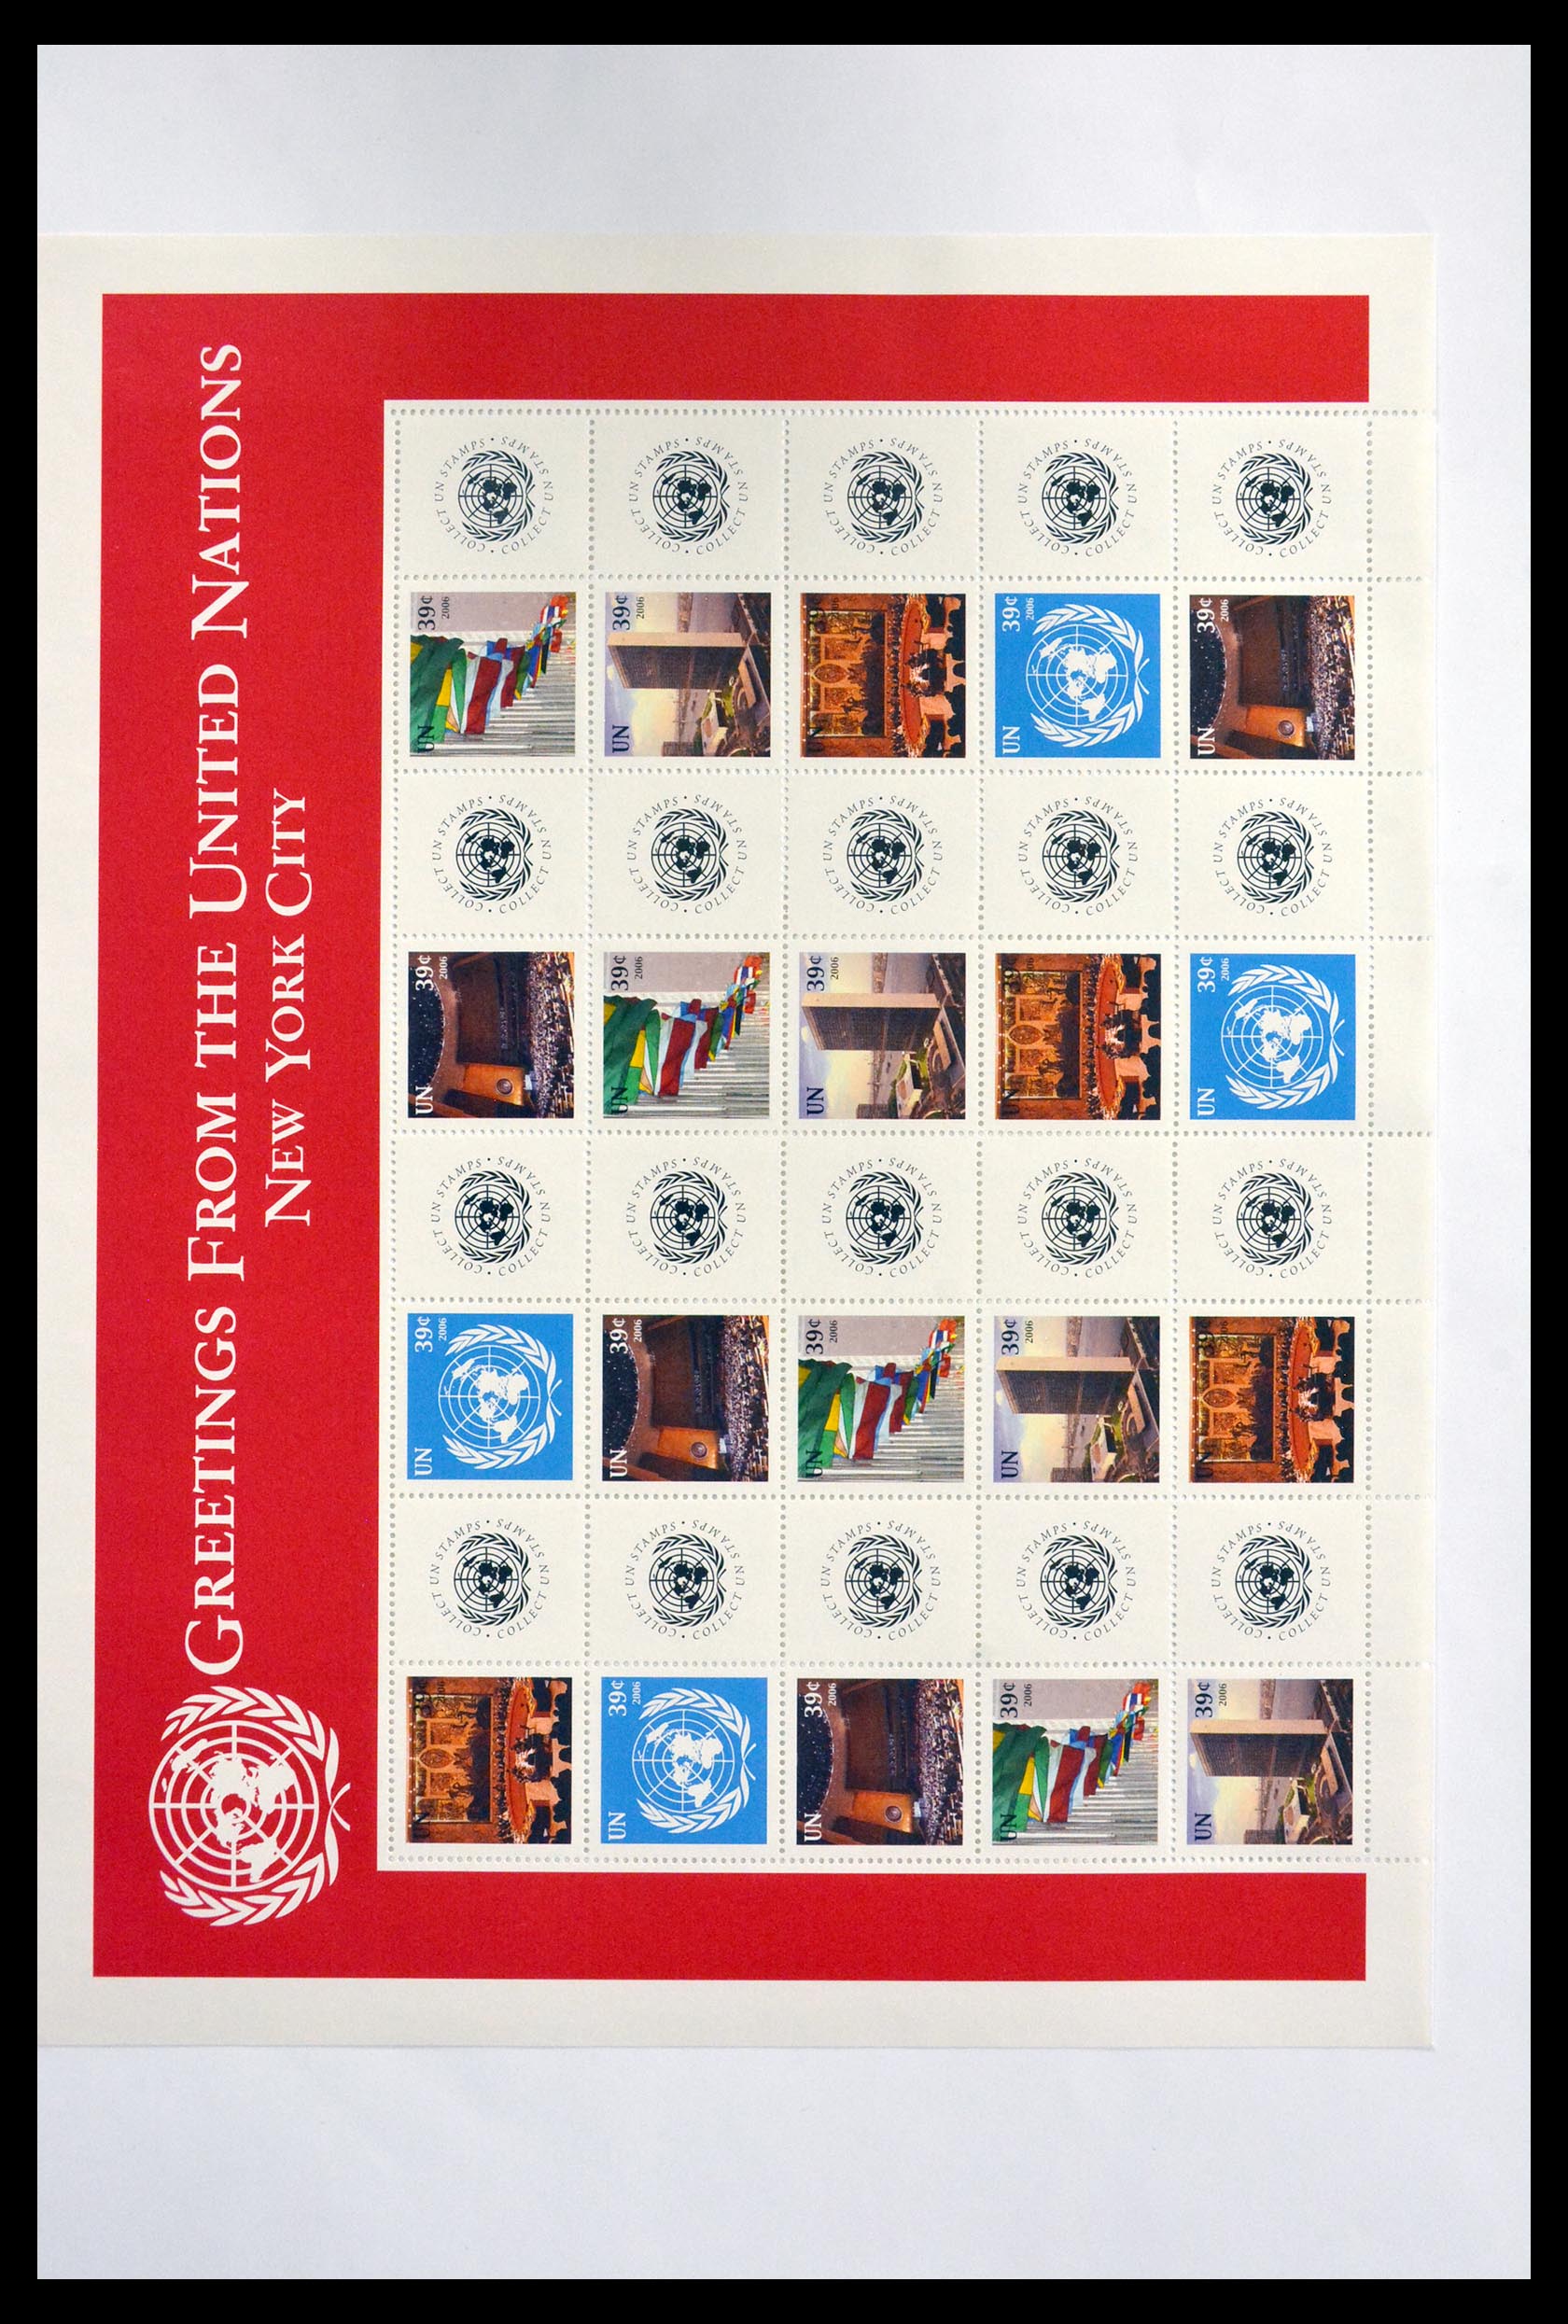 29721 008 - 29721 United Nations personalised sheets 2003-2010.